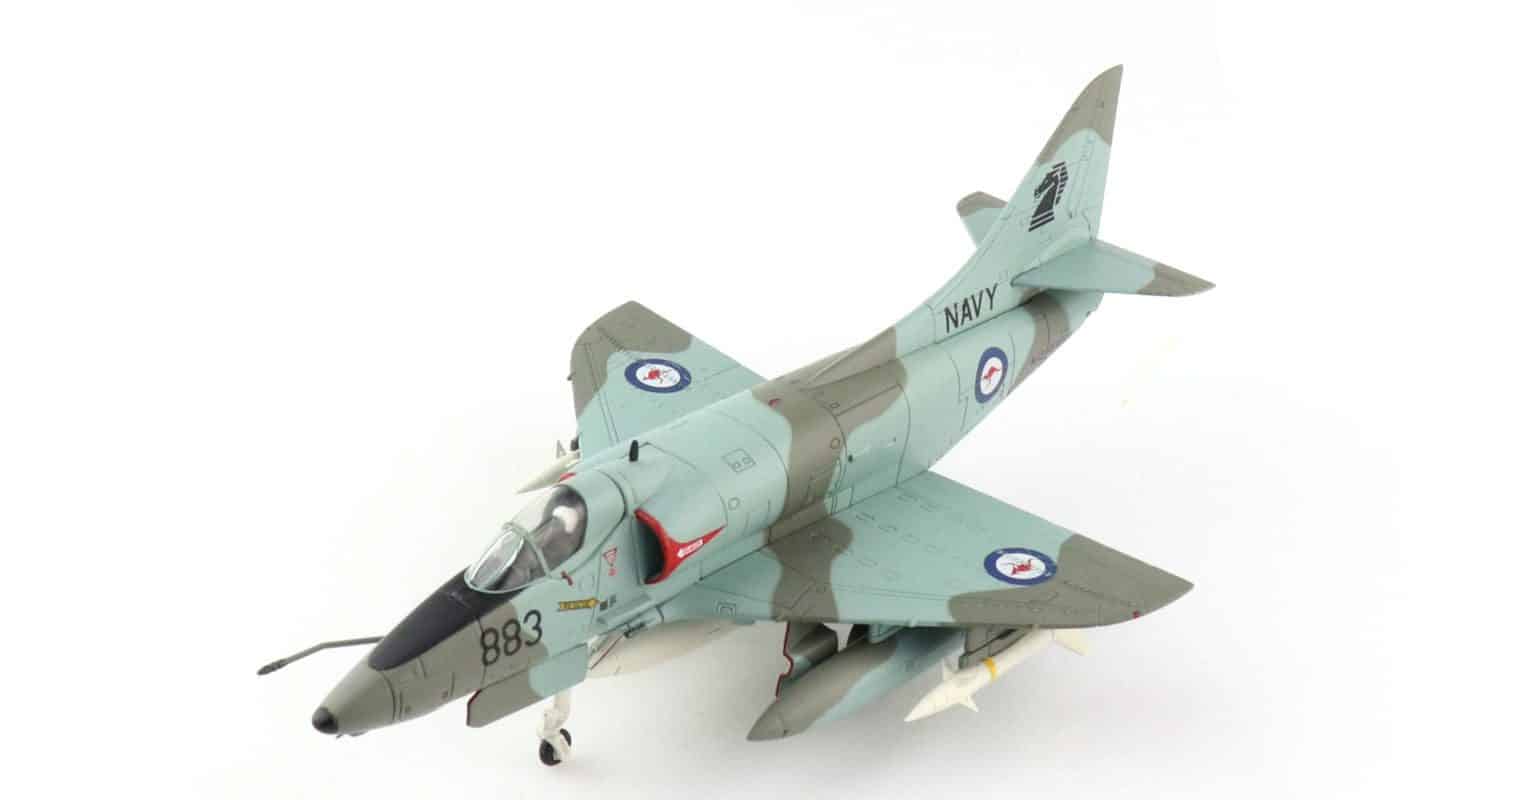 Front port side view of Hobby Master HA1430 - 1/72 scale diecast model of the Douglas A-4G Skyhawk of serial number N13-154904, buzz number 883, VF-805, RAN while aboard HMAS Melbourne, 1980.